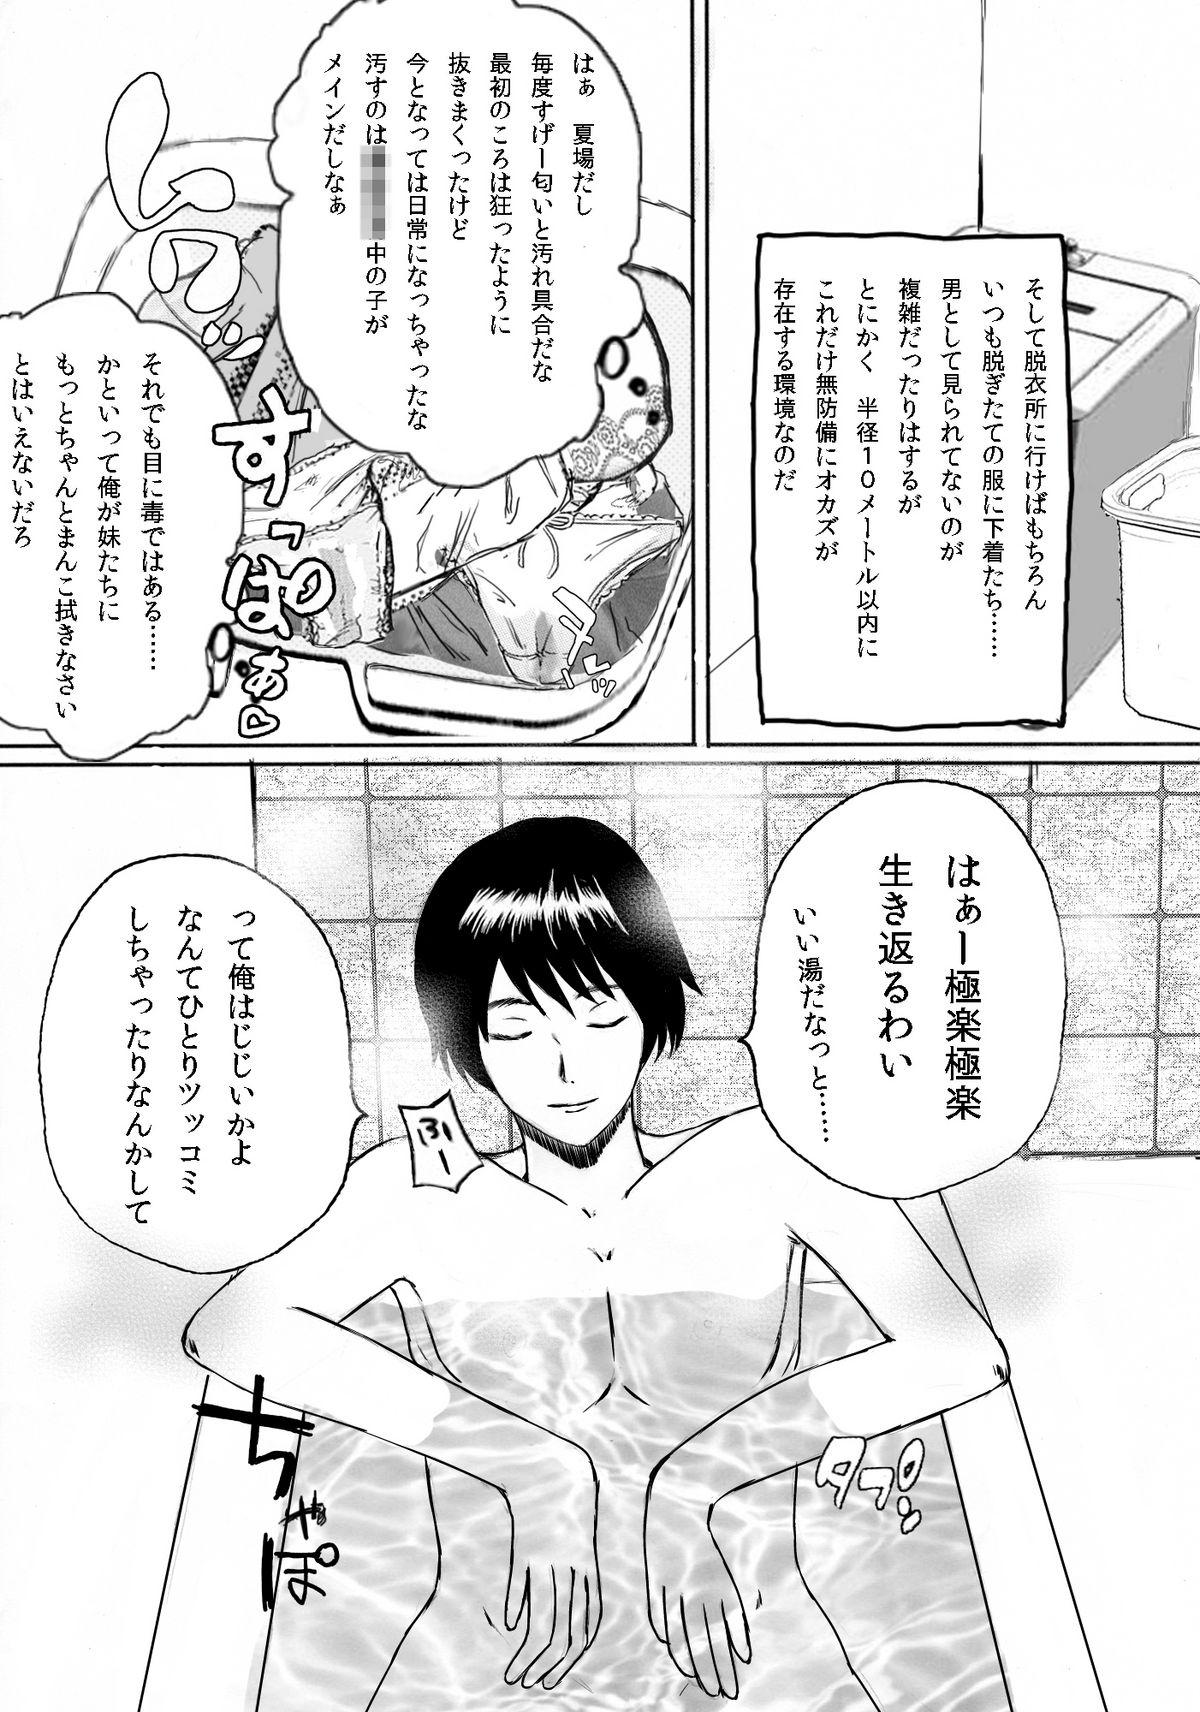 Beurette 大家族の長男ですが何か？ Girl Girl - Page 9